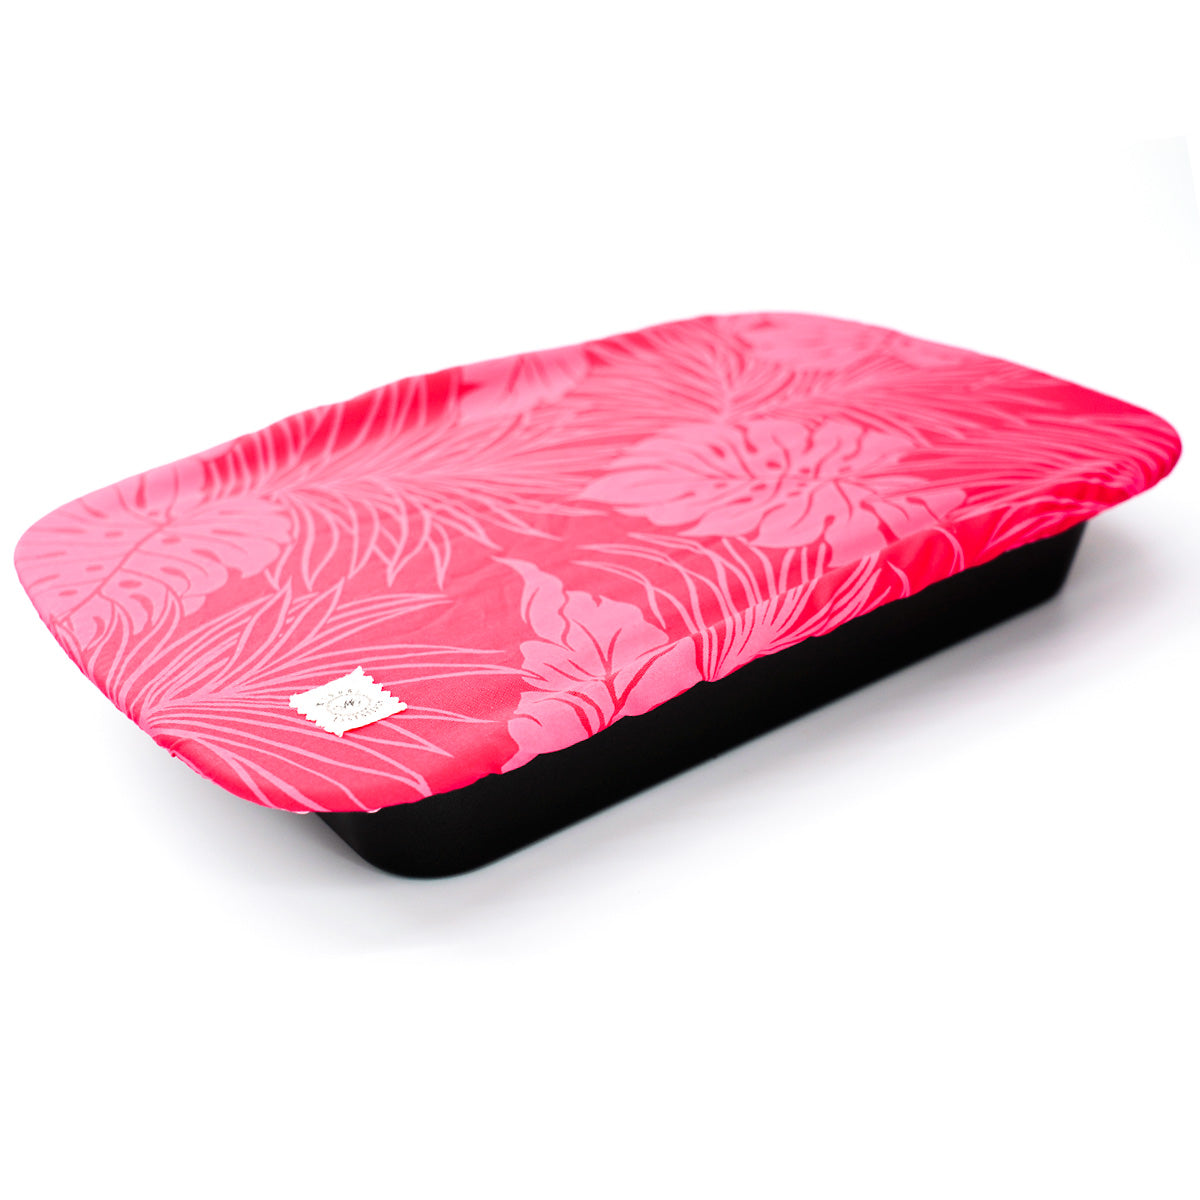 Reusable Washable 9"x13" Pan Covers Eco Friendly Alternative - Pink